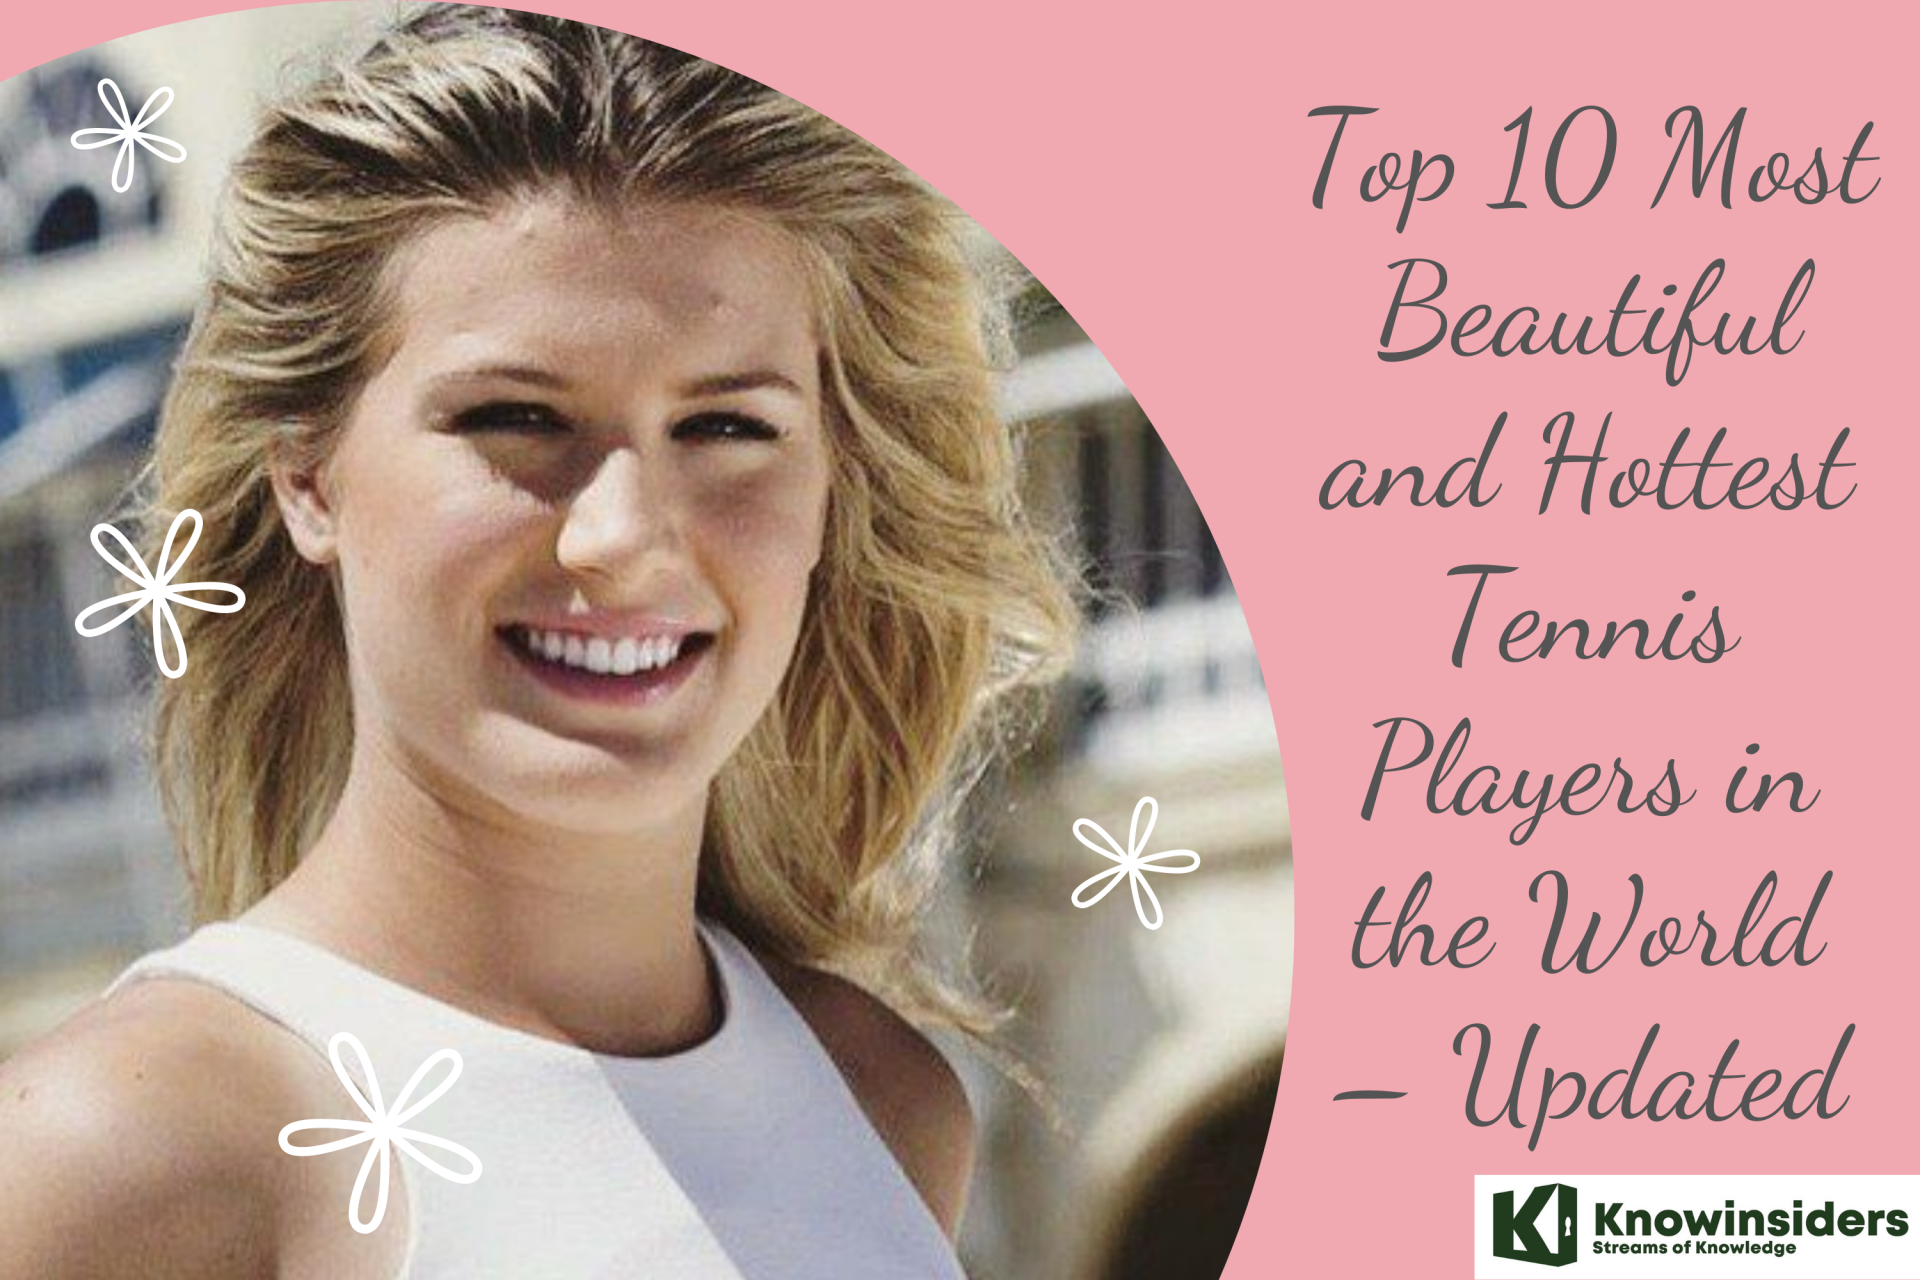 Top 10 Most Beautiful Tennis Players in the World 2023/2024